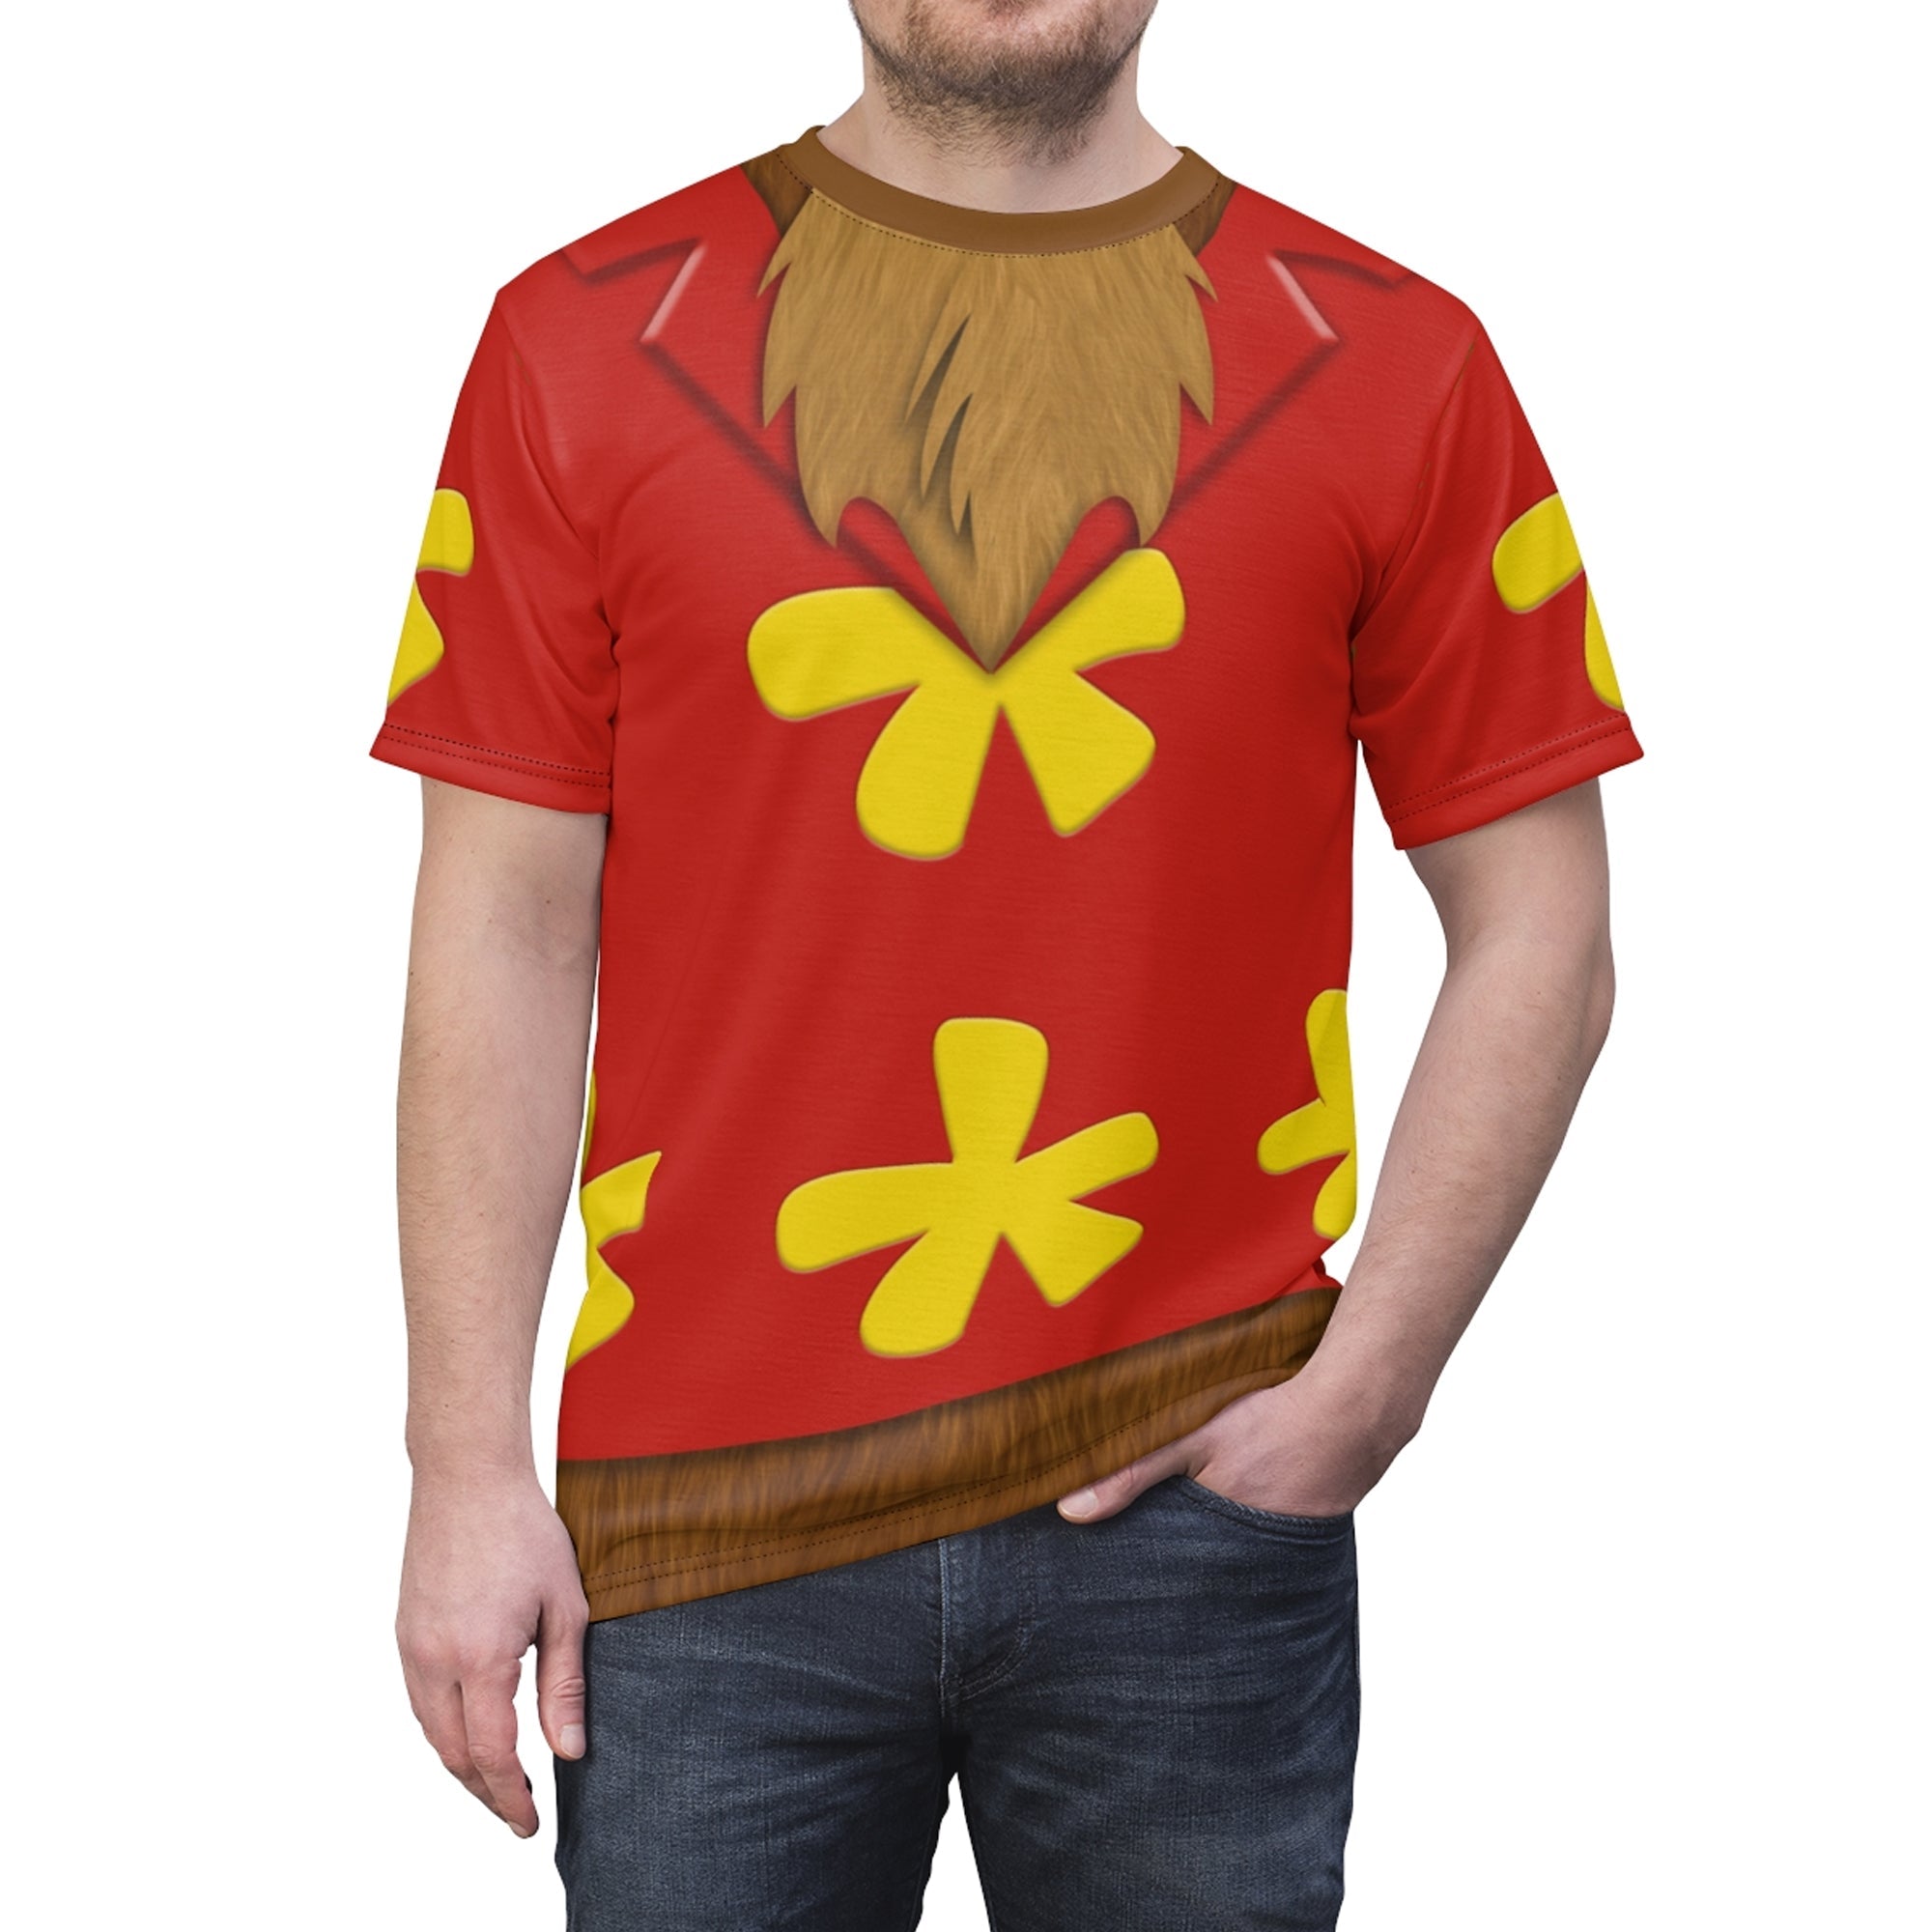 Dale Rescue Rangers Chip 'N' Dale Costume T-Shirt For Men